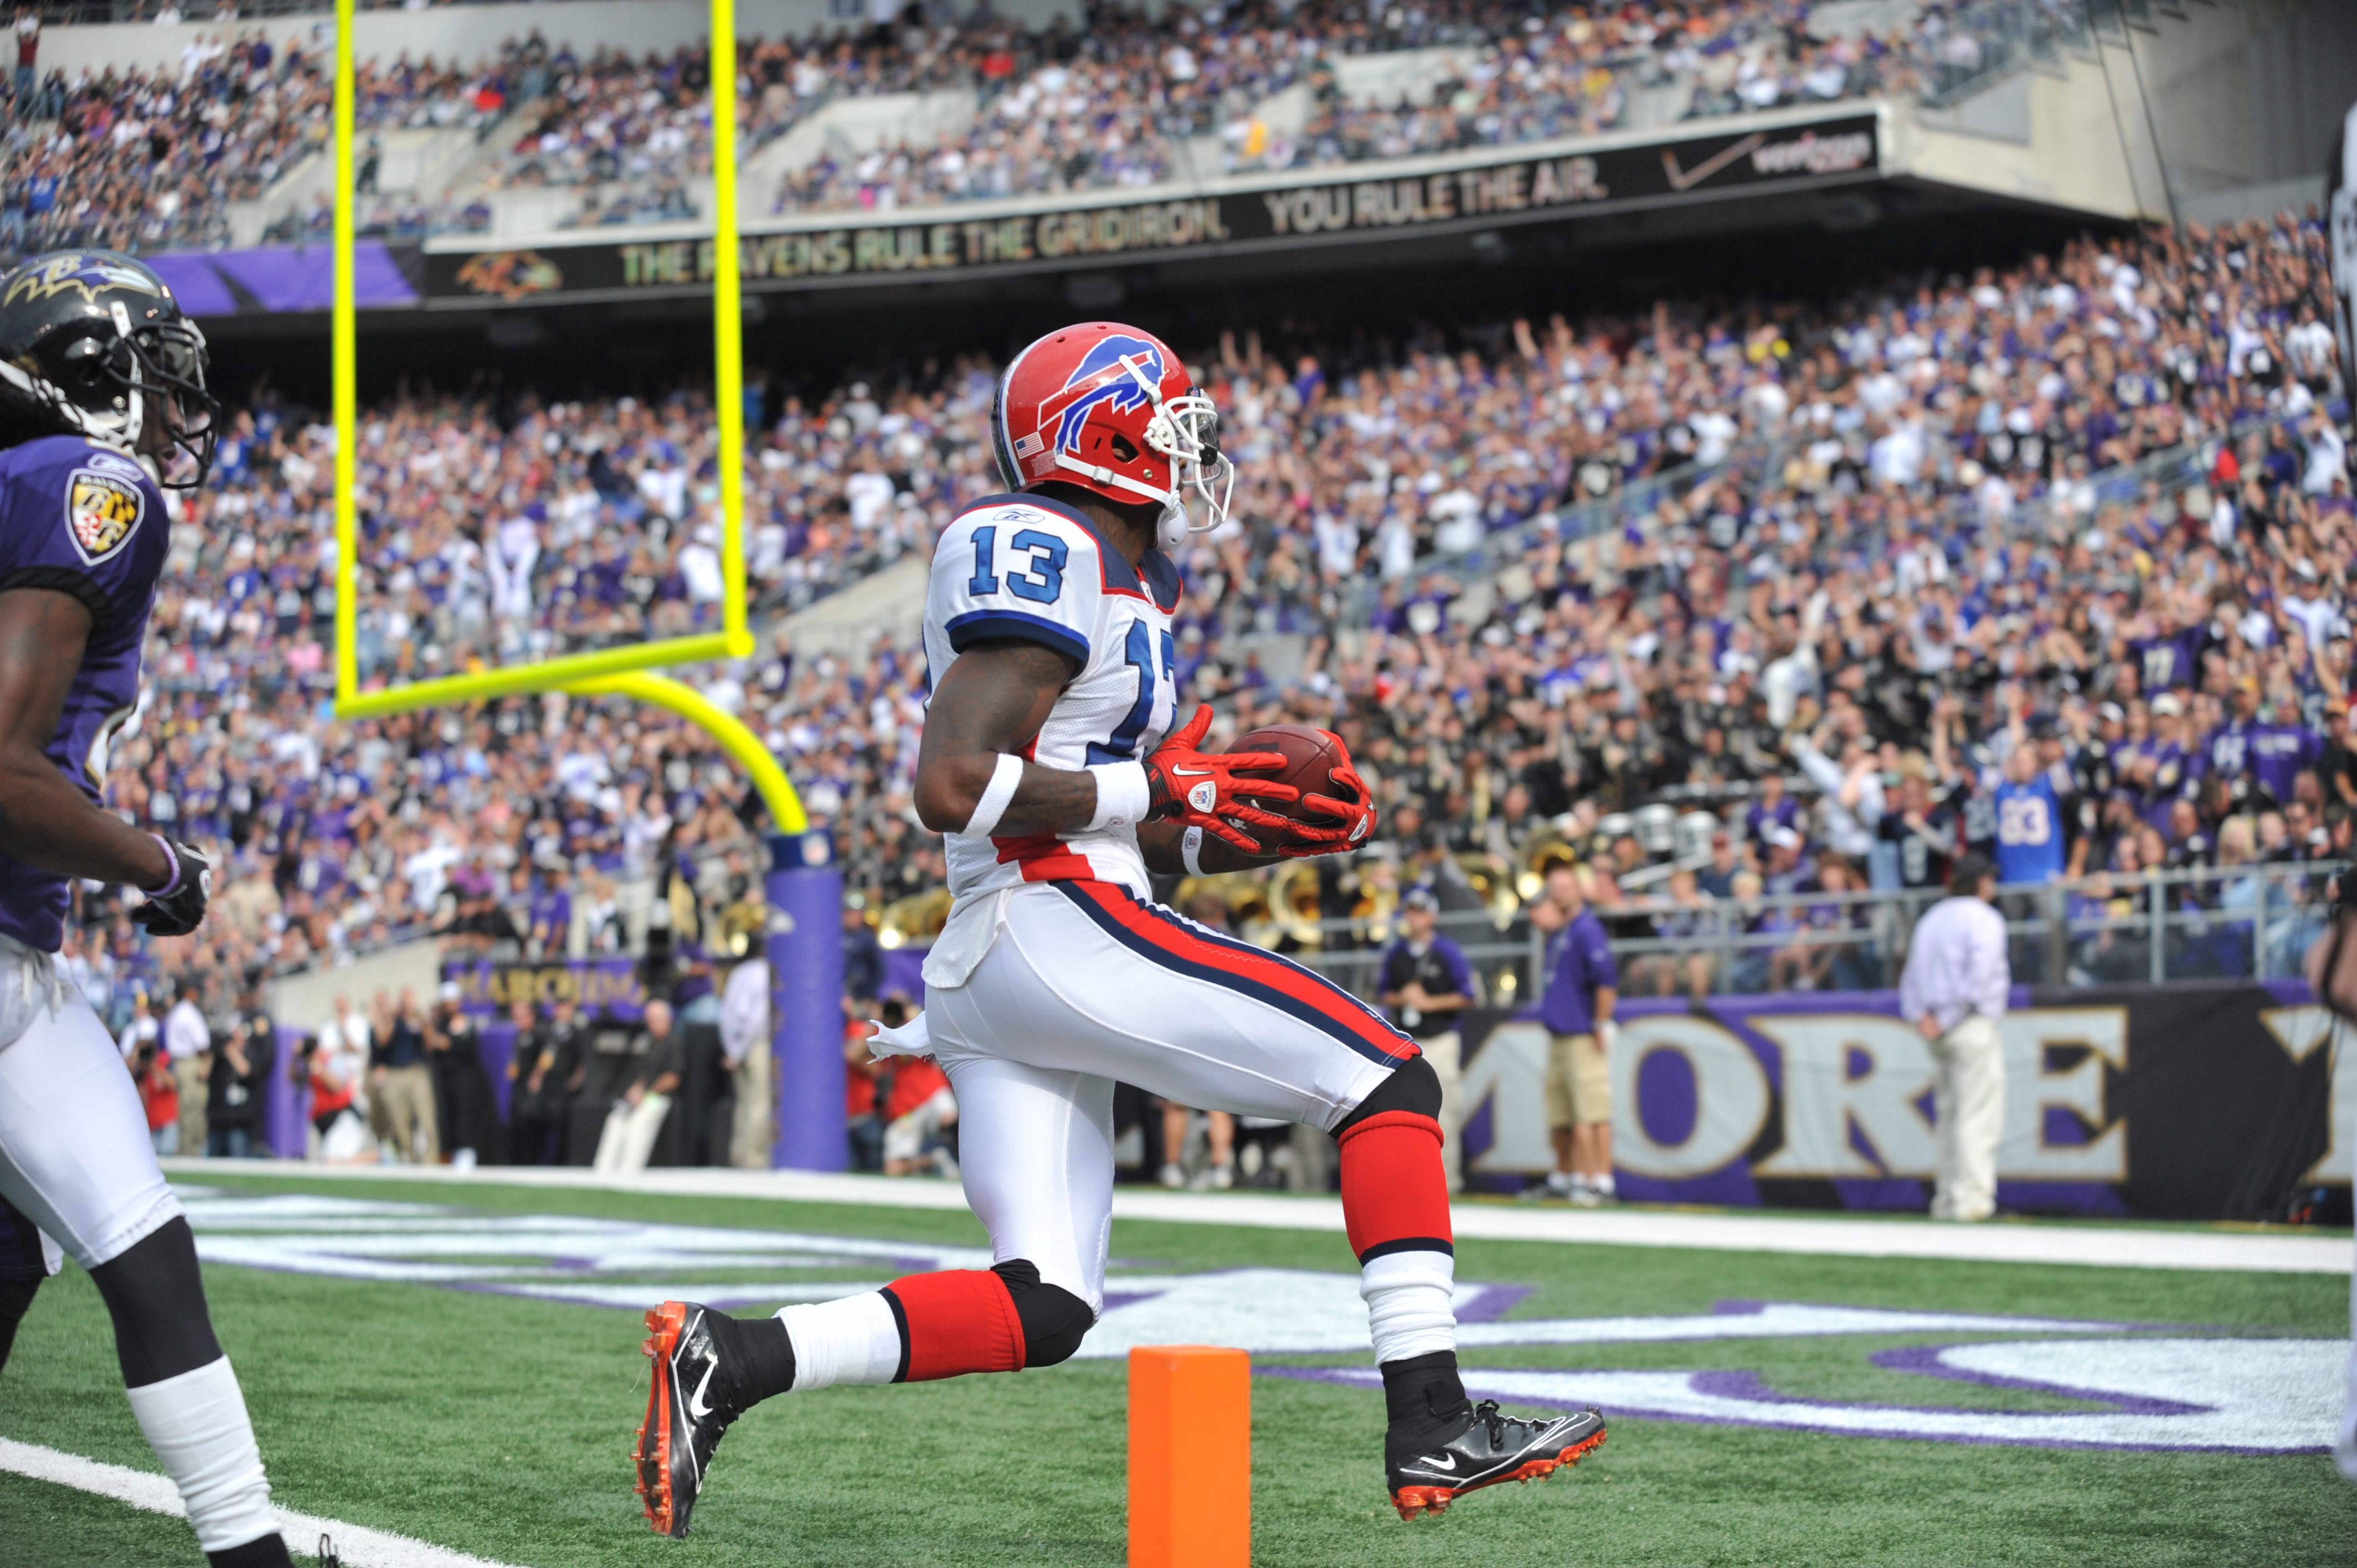 BALTIMORE, MD - OCTOBER 24:  Steve Johnson #13 of the Buffalo Bills scores a touchdown against the Baltimore Ravens at M&T Bank Stadium on October 24, 2010 in Baltimore, Maryland. The Ravens defeated the Bills 37-34. (Photo by Larry French/Getty Images)